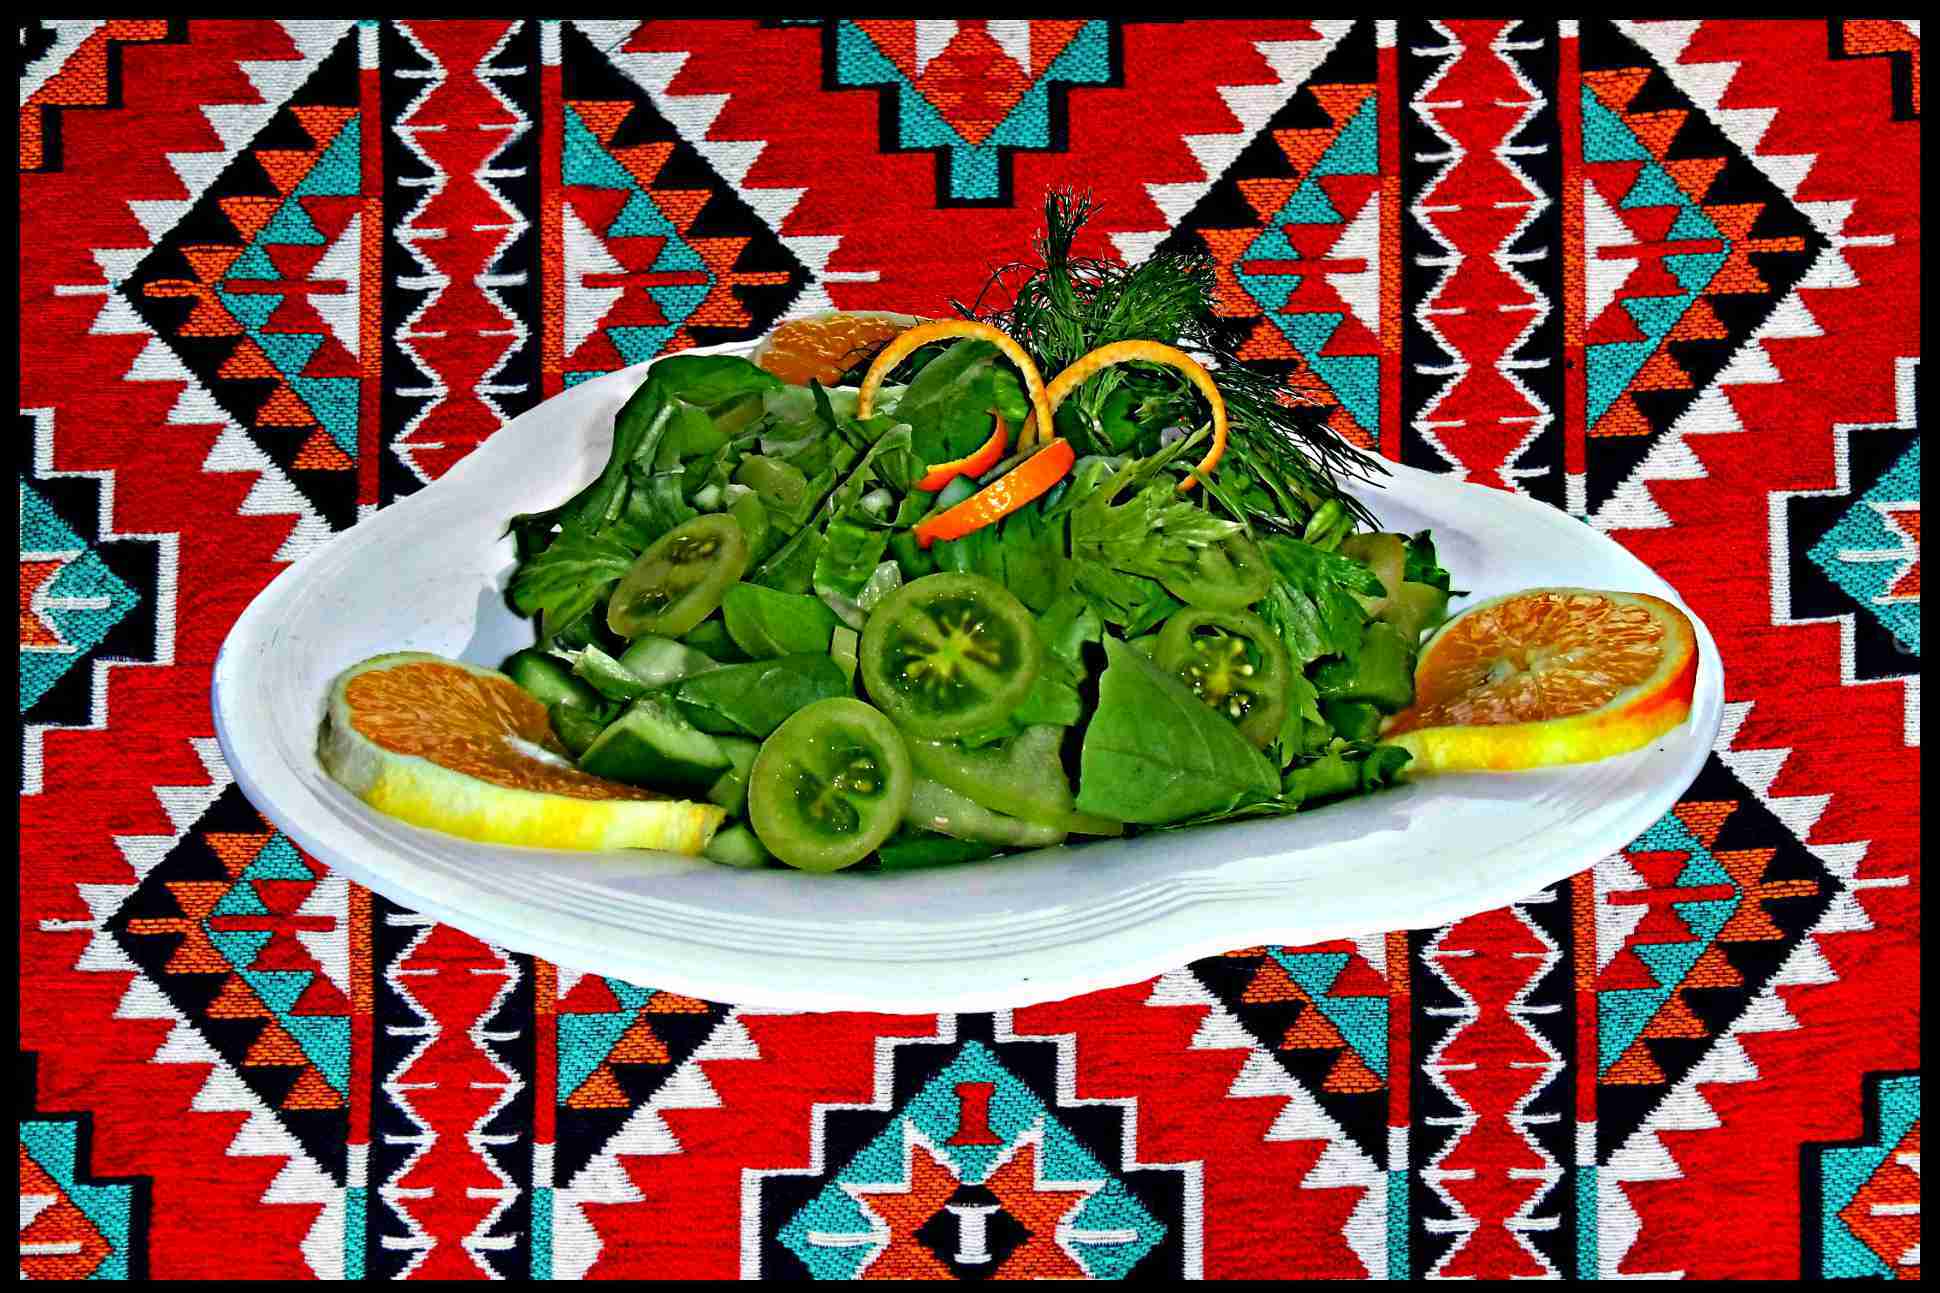 Rocca Salad; My Mom's Recipe; Petra Culinary; Middle Eastern Cuisine; Gourmet Salad; Petra Dining; Culinary Excellence; Fresh Ingredients; Petra Specialties; Culinary Adventure; Unique Salad Variety; Flavorful Rocca; Best Rocca Salad in Petra; Palate Pleasers; Petra's Culinary Scene; Rocca Medley; Locally-Sourced Ingredients; Gourmet Exploration; Fine Dining; Petra's Rocca Delight; Gastronomic Pleasure